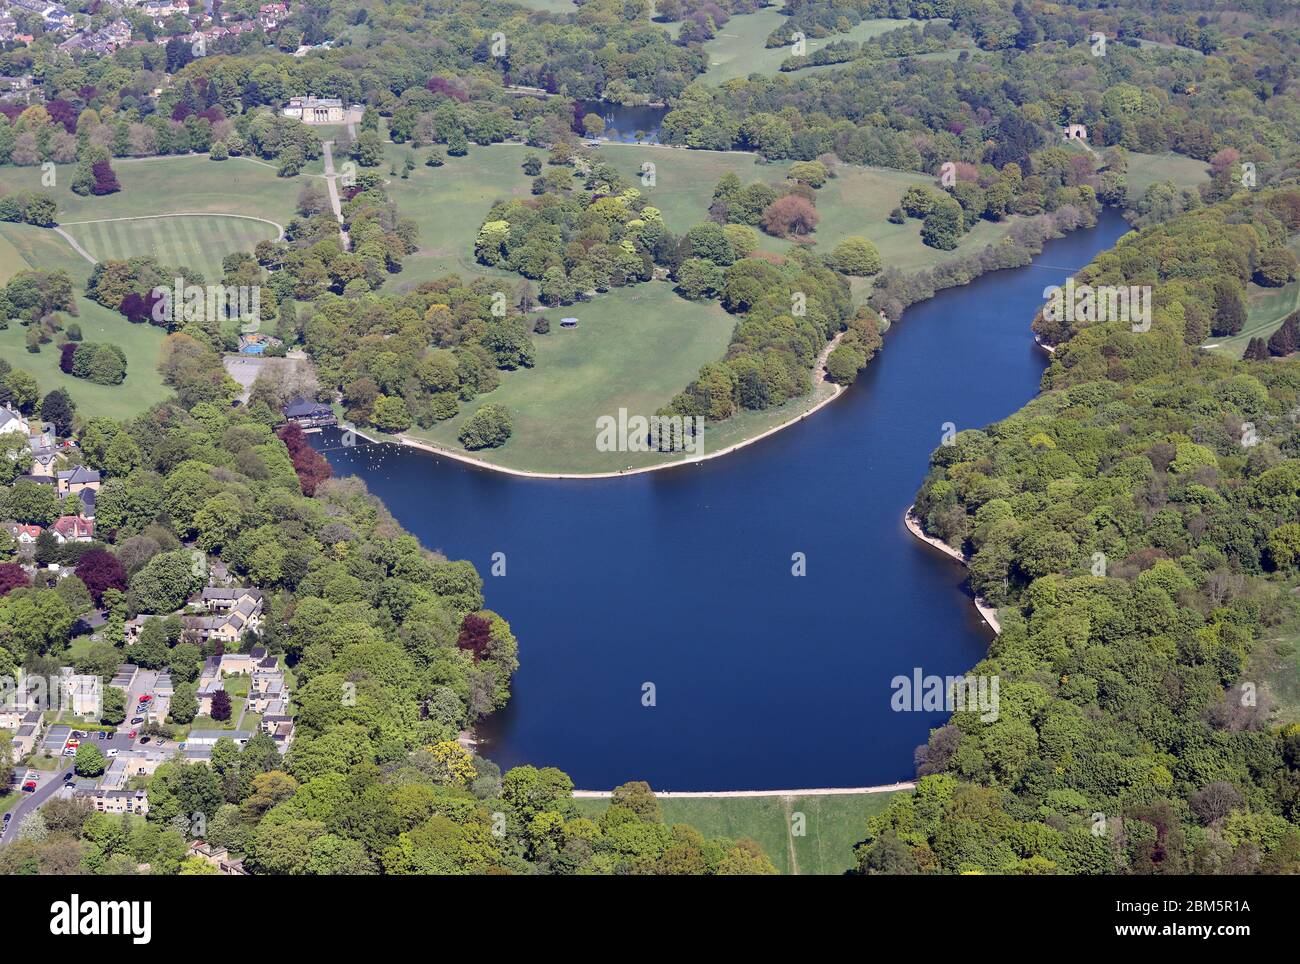 aerial-view-of-roundhay-park-waterloo-lake-the-park-arena-the-mansion-leeds-uk-2BM5R1A.jpg